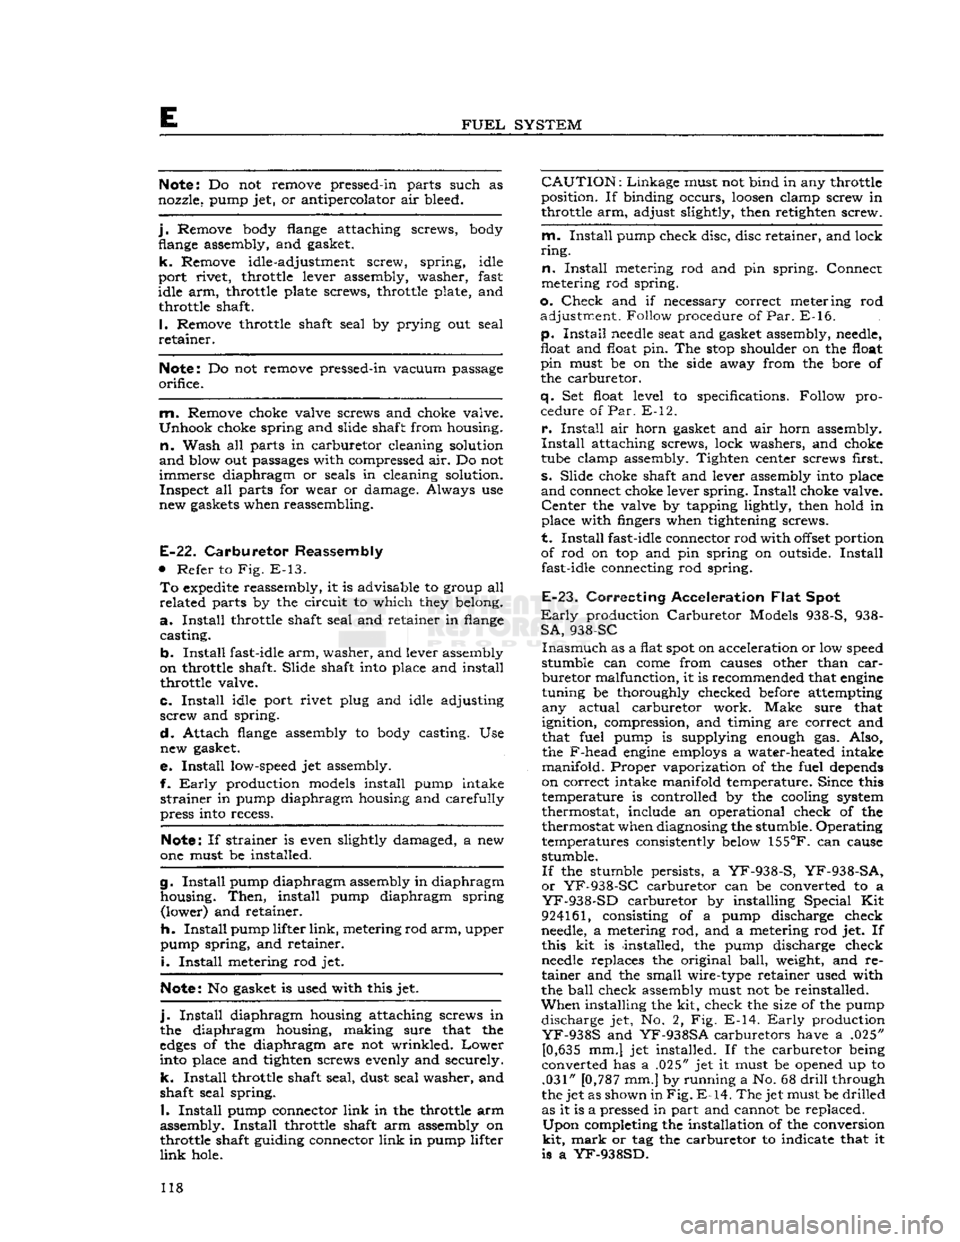 JEEP CJ 1953  Service Manual 
E 

FUEL
 SYSTEM 
Note:
 Do not remove pressed-in parts such as 
nozzle, pump jet, or antipercolator air bleed. 

j.
 Remove body flange attaching screws, body  flange assembly, and gasket. 

k.
 Rem